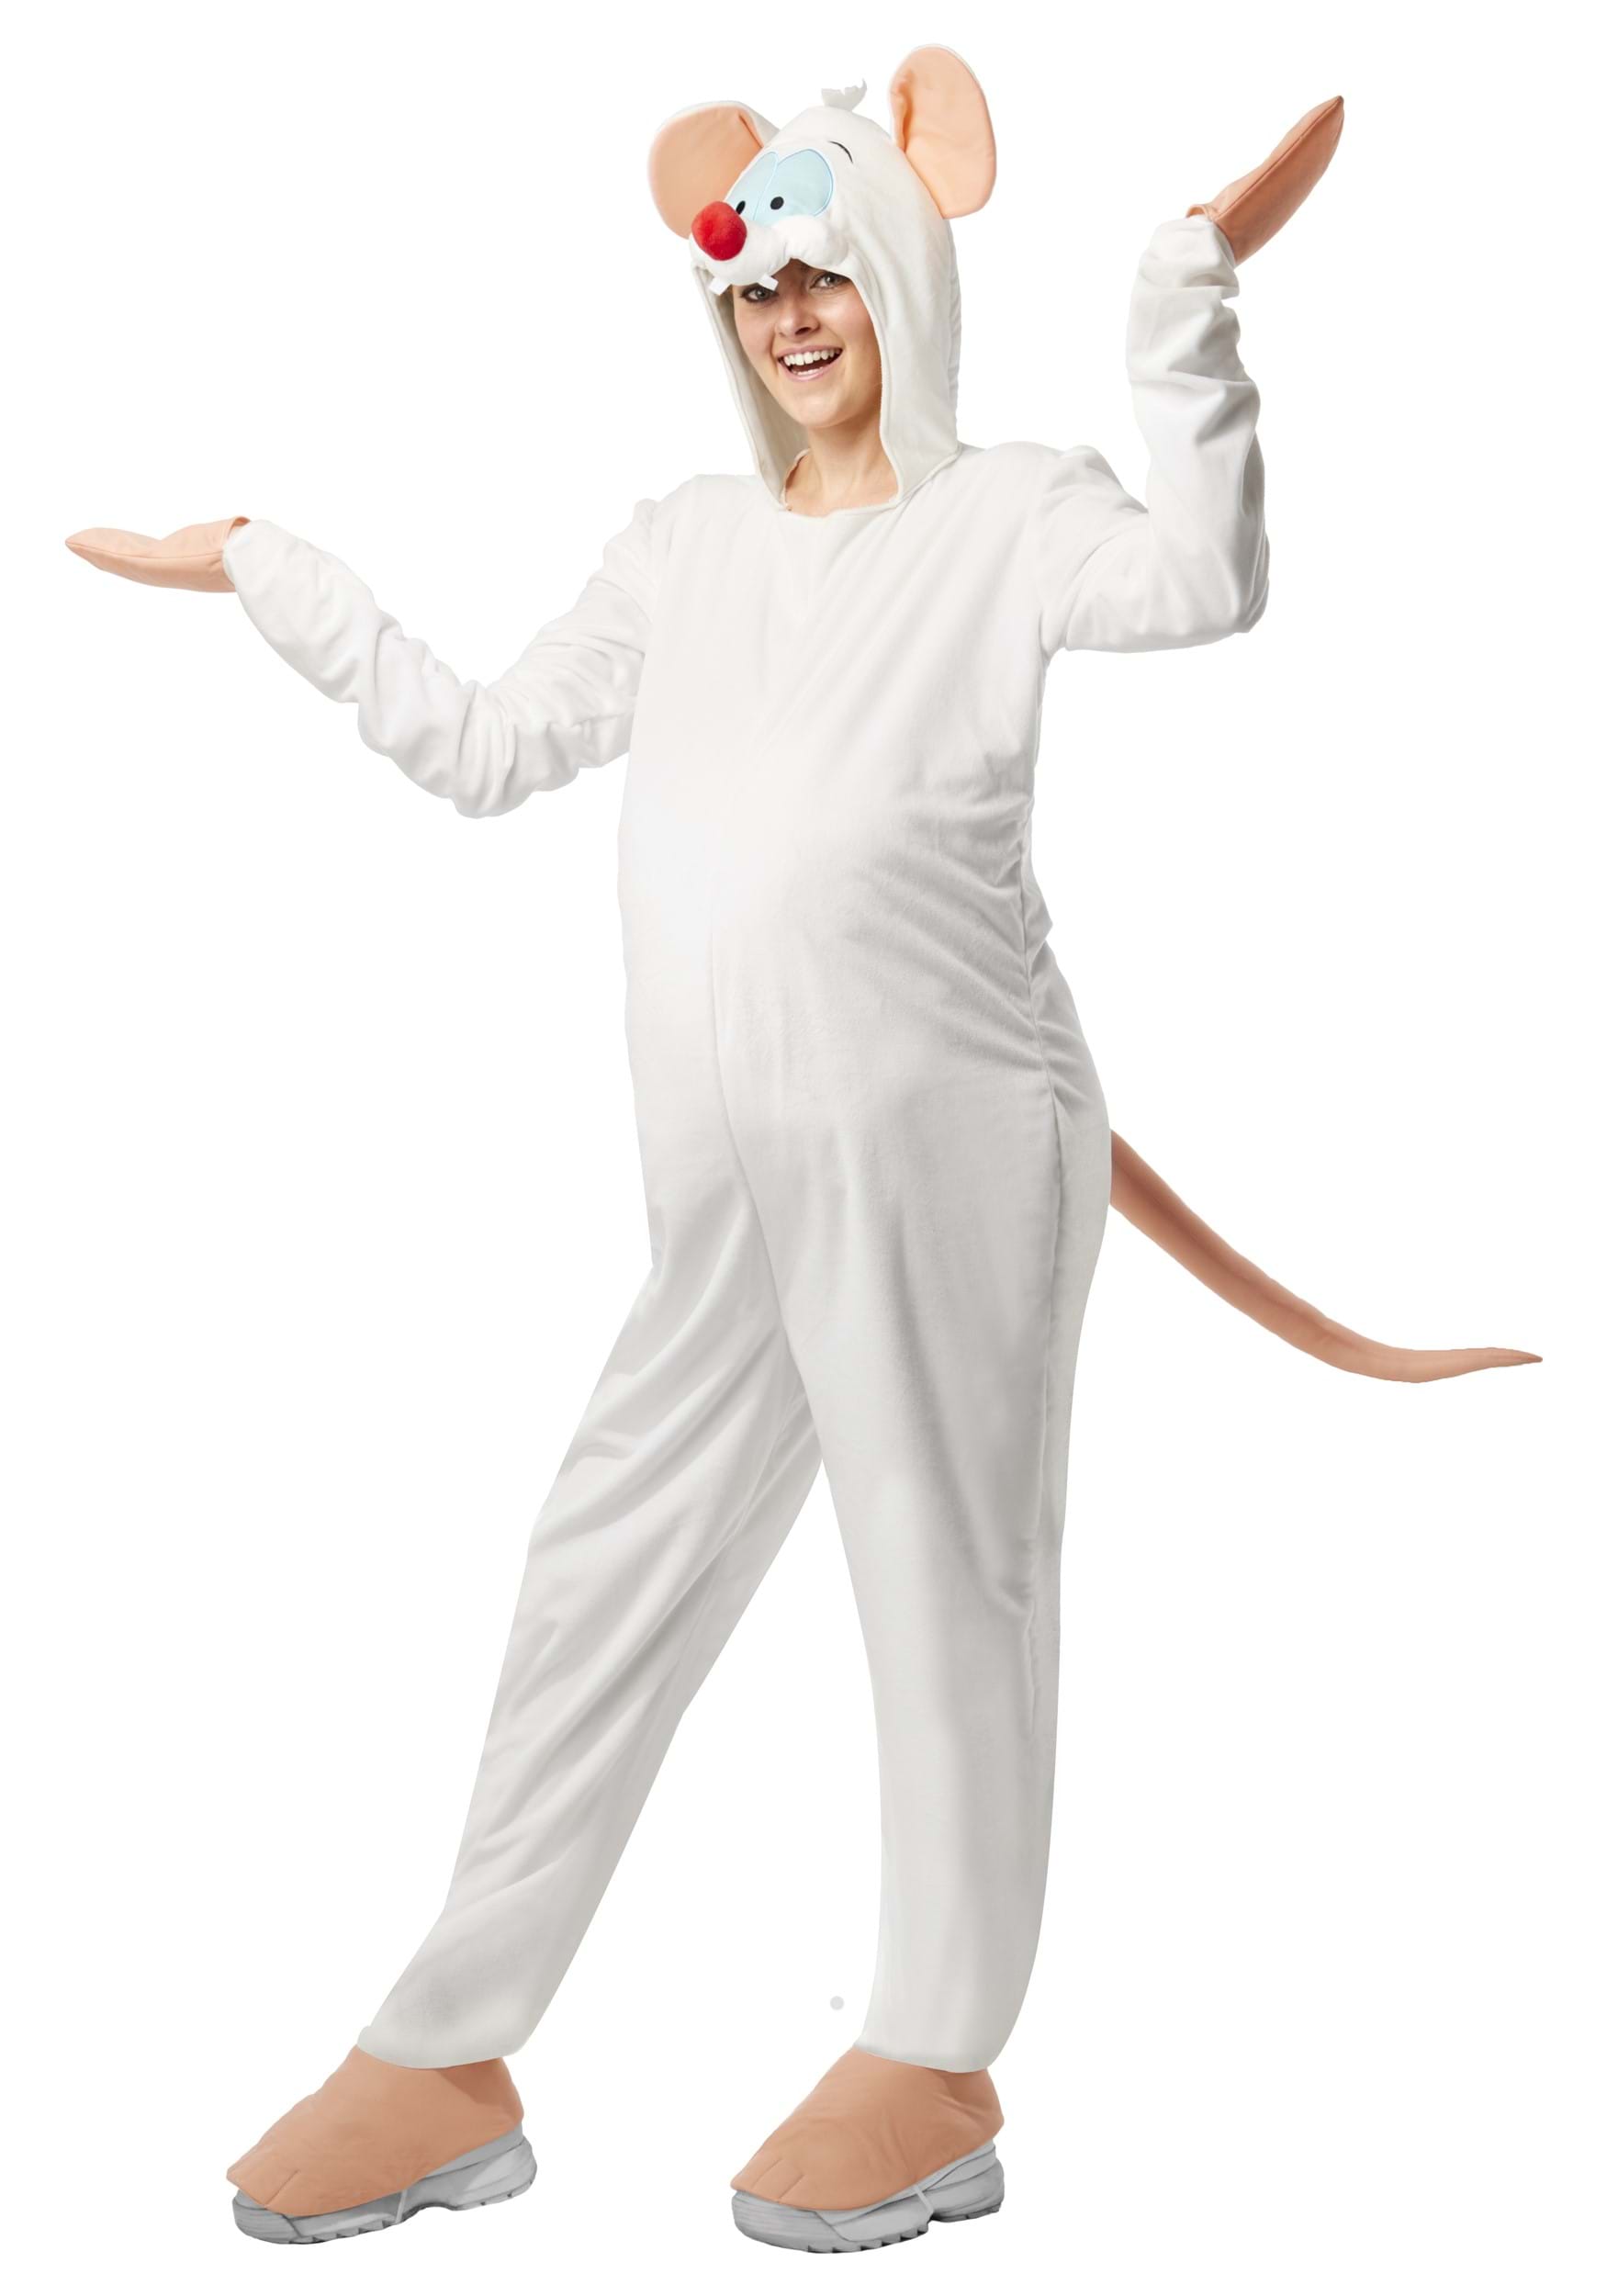 Image of Pinky and the Brain Adult Pinky Costume ID RU702968-S/M